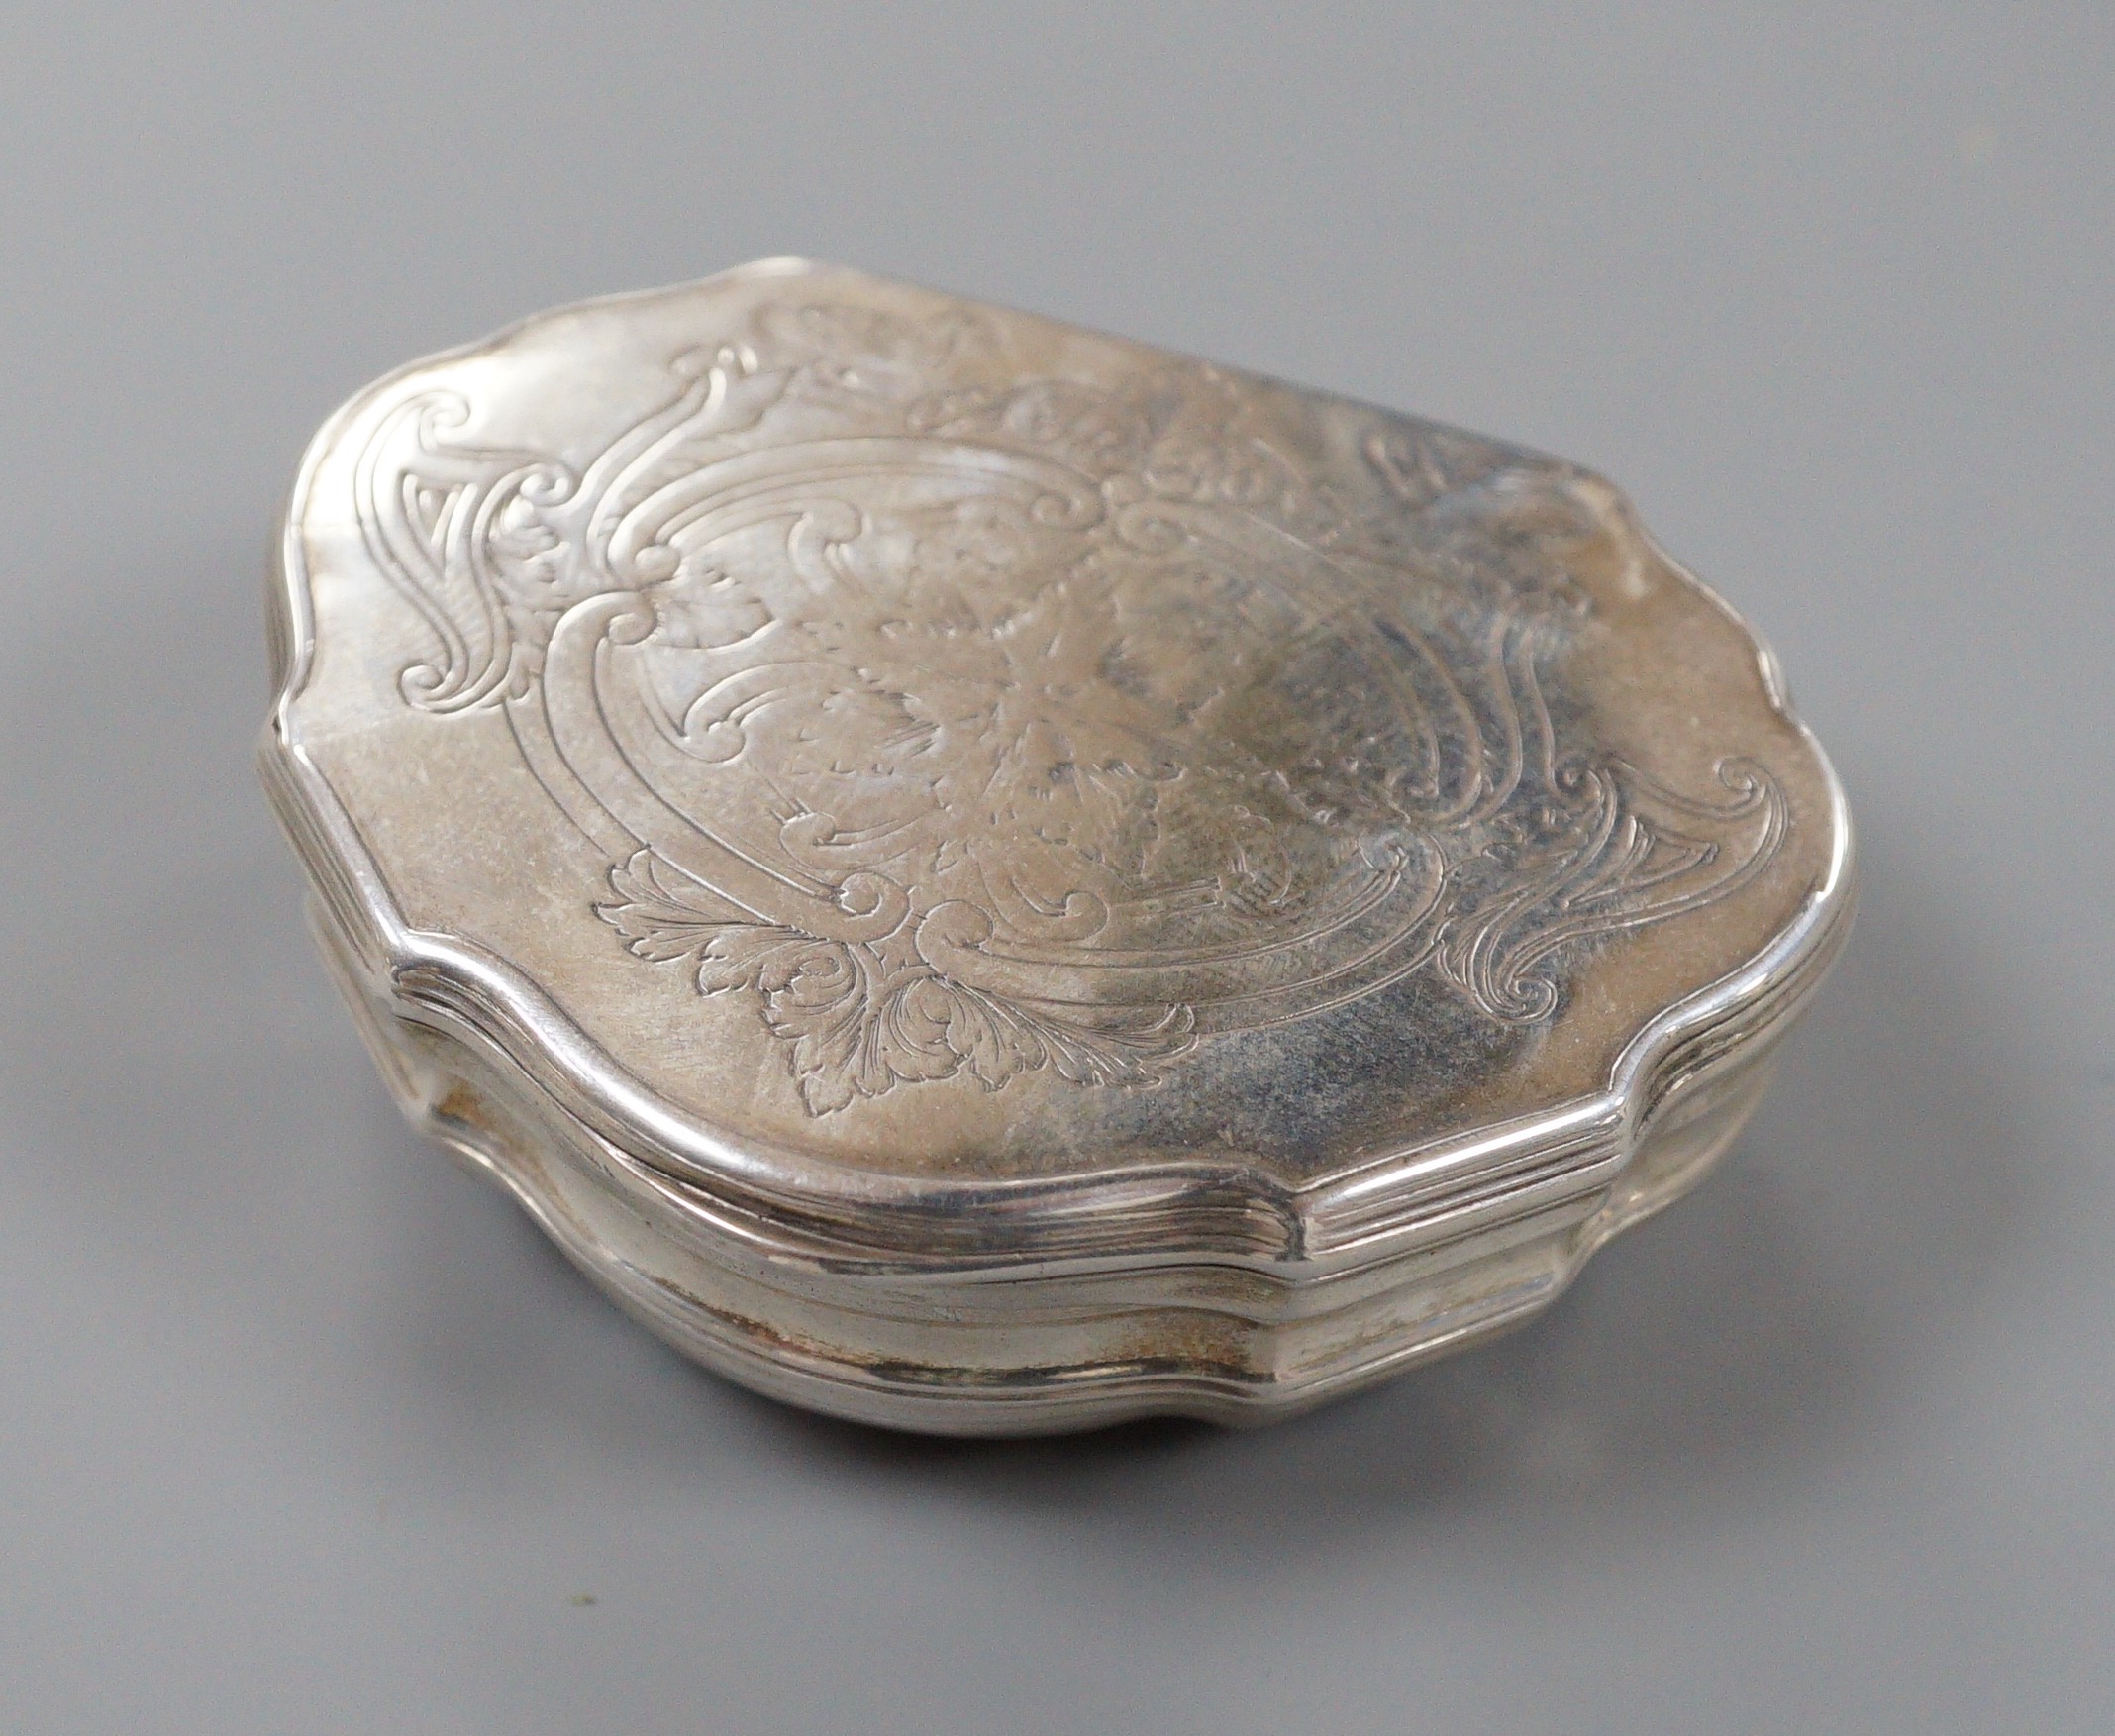 A late 18th/early 19th century white metal shaped demi-lune snuff box, makers mark, OR, 7cm, 69.5 grams.